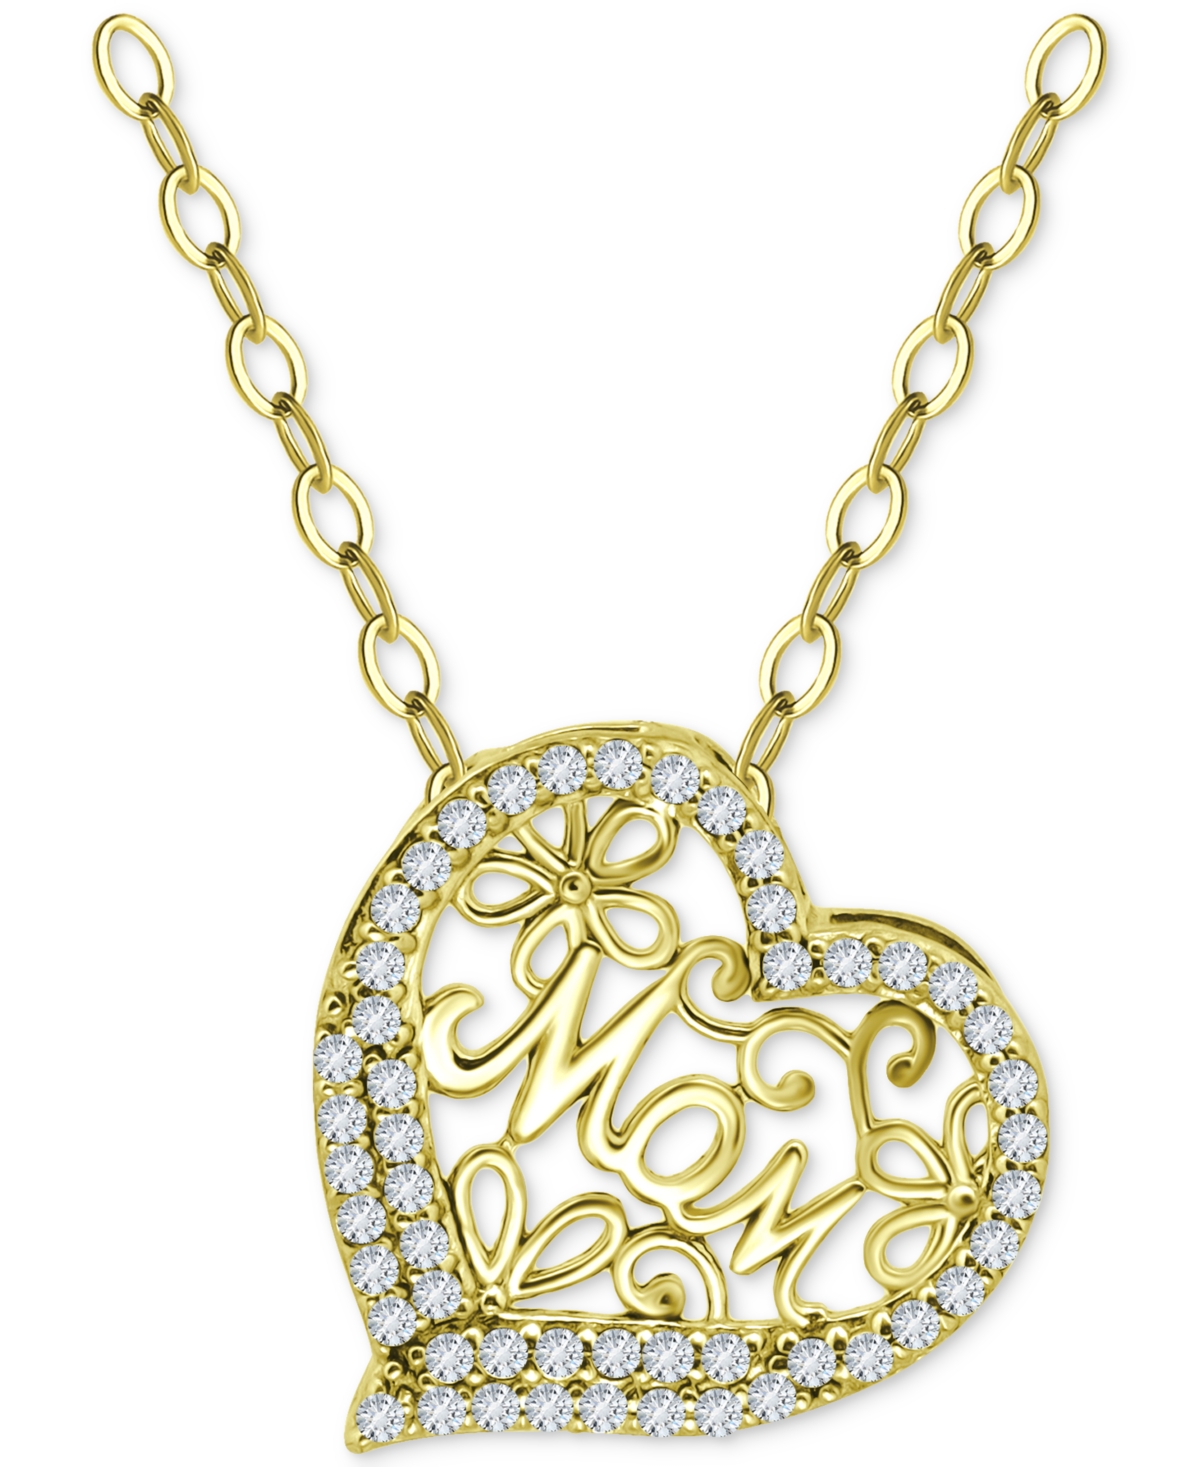 Giani Bernini Cubic Zirconia Mom Heart Pendant Necklace In 18k Gold-plated Sterling Silver, 16" + 2" Extender, Cre